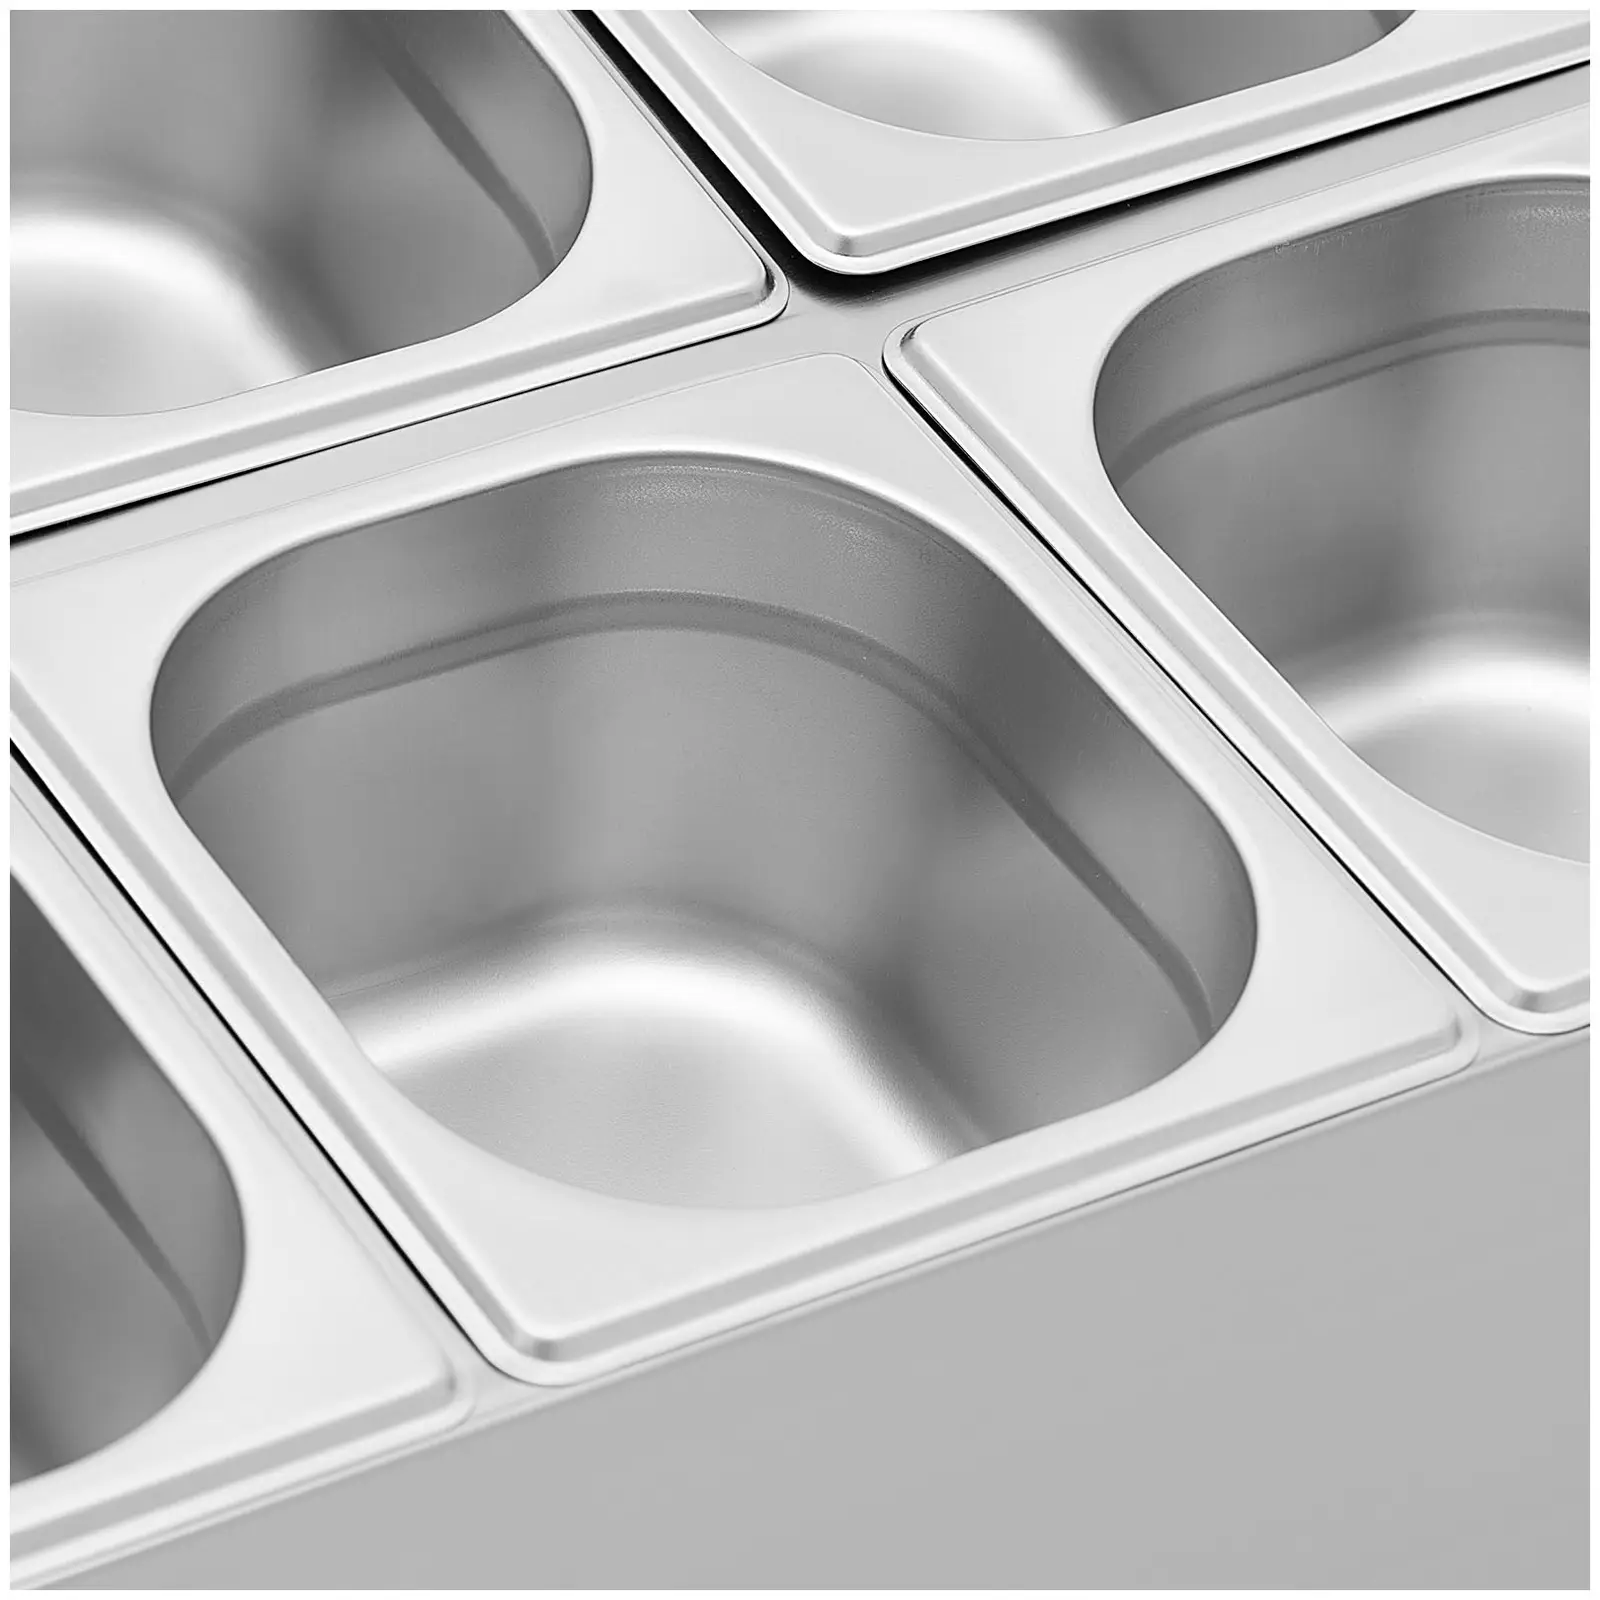 Bain Marie - 2 x 4 GN 1/6 - 15.2 l - Royal Catering